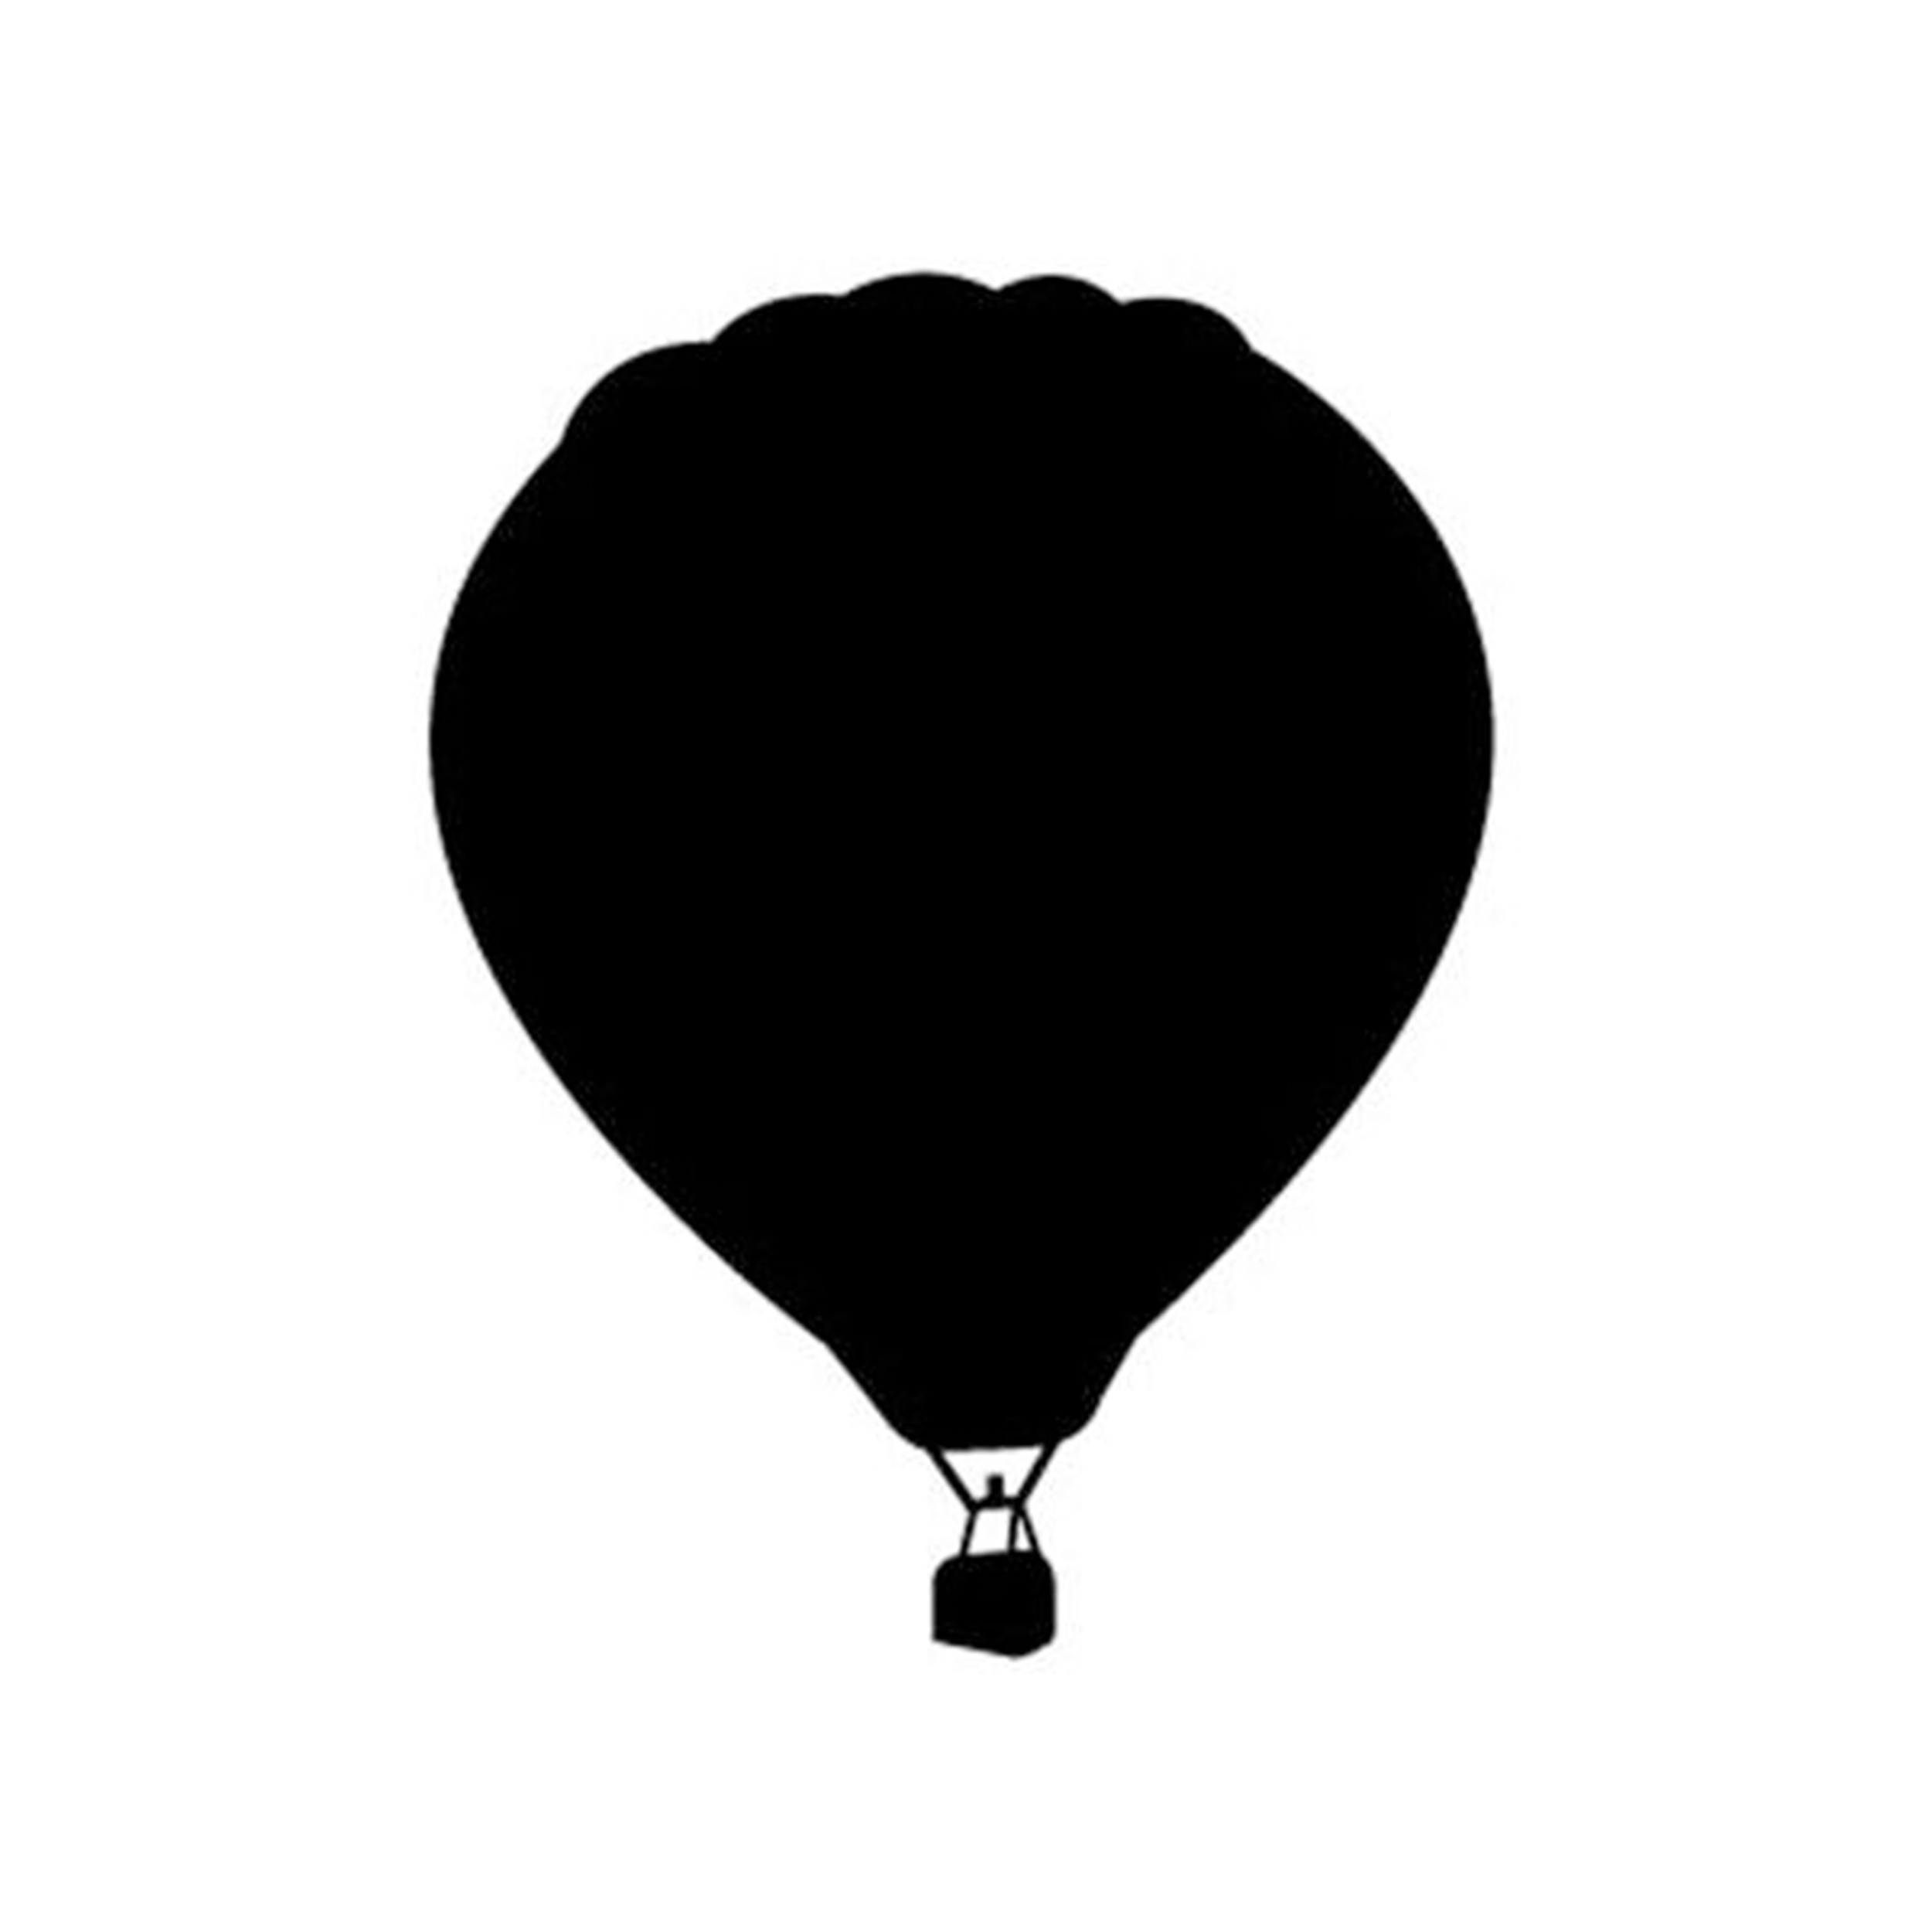 Woodworking Project Paper Plan To Build Hot Air Balloons Shadow